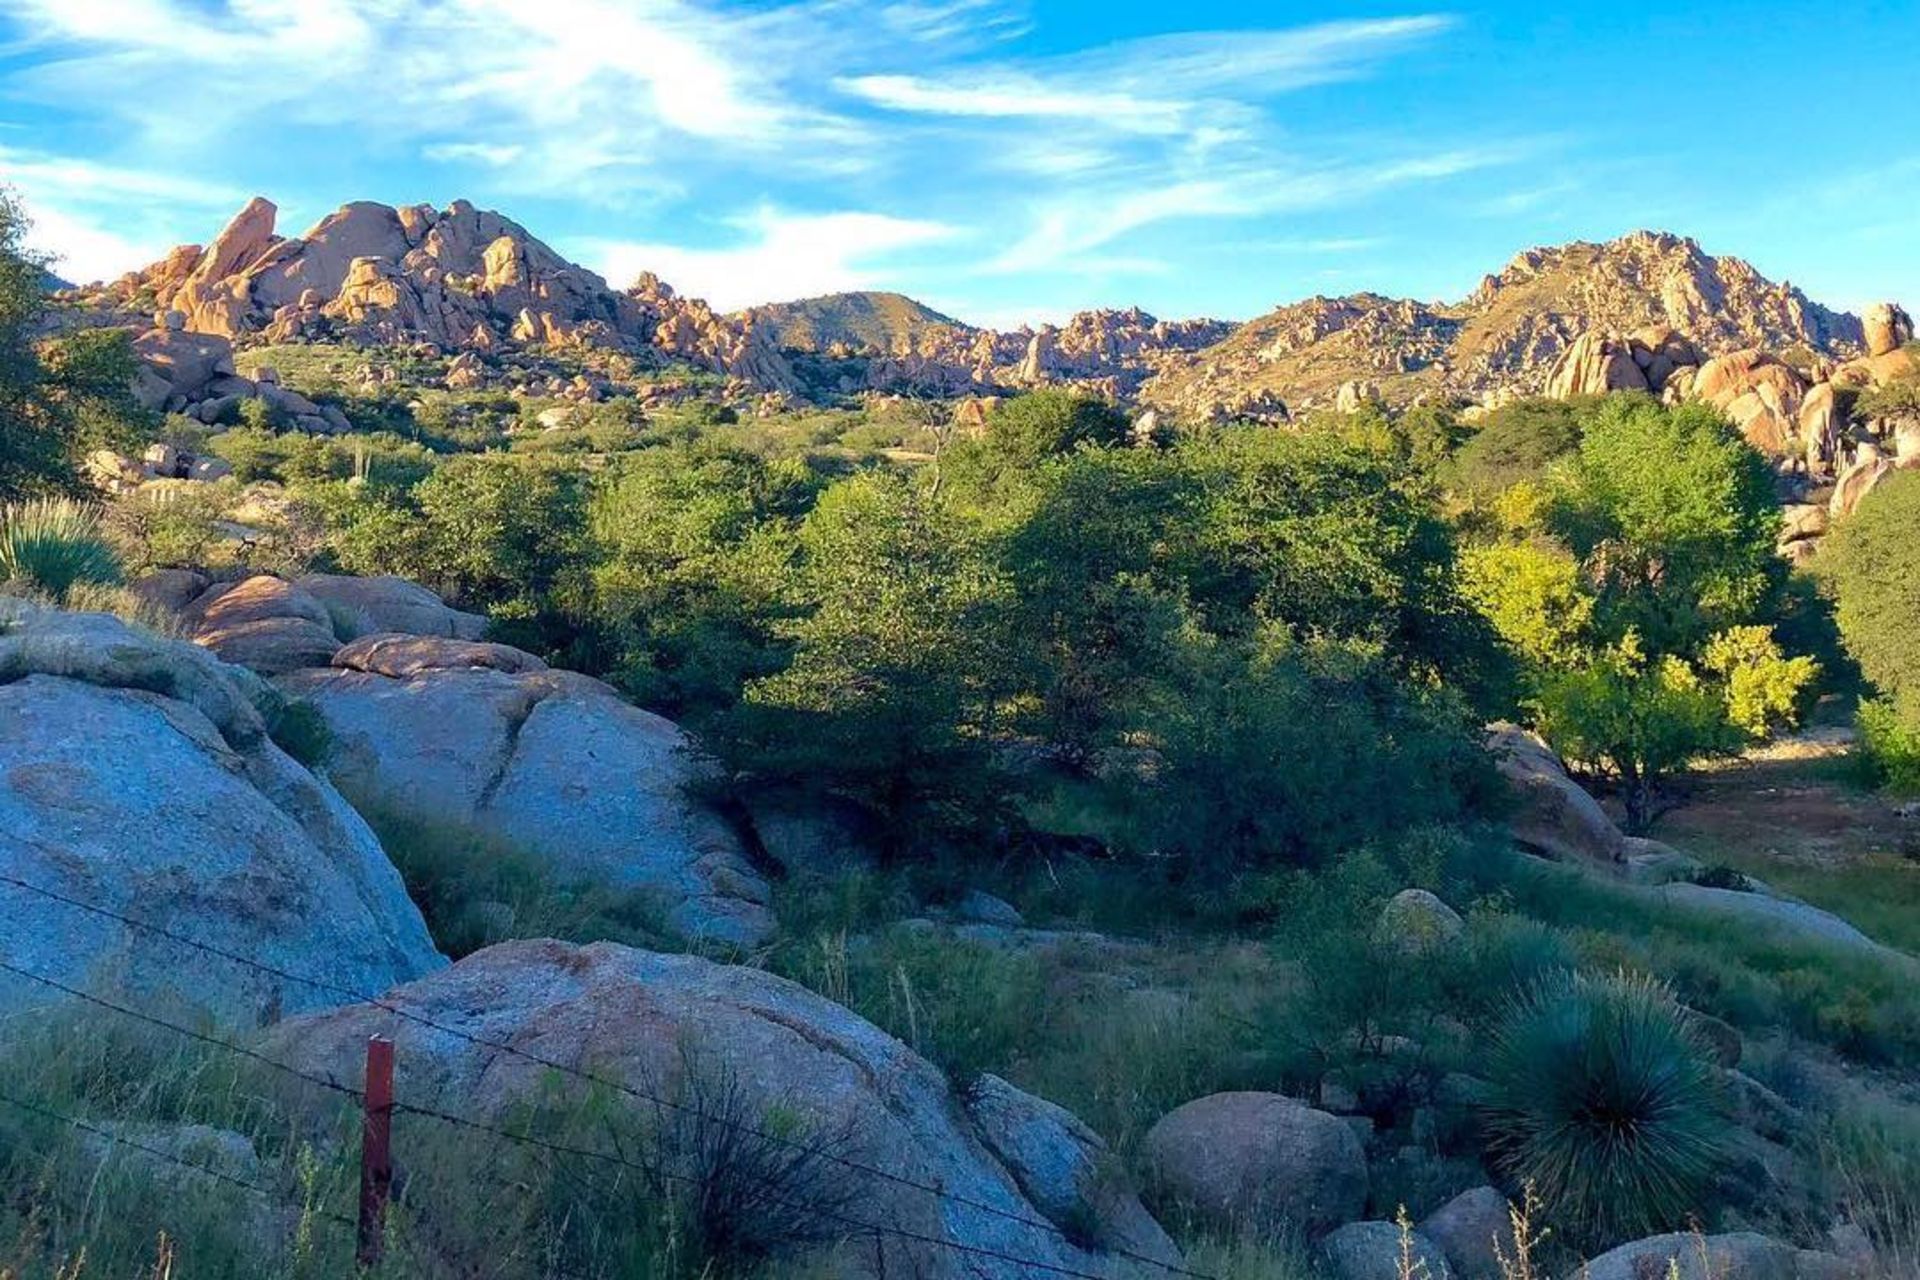 Explore Arizona Desert and Mountain Views in Cochise County! - Image 9 of 9